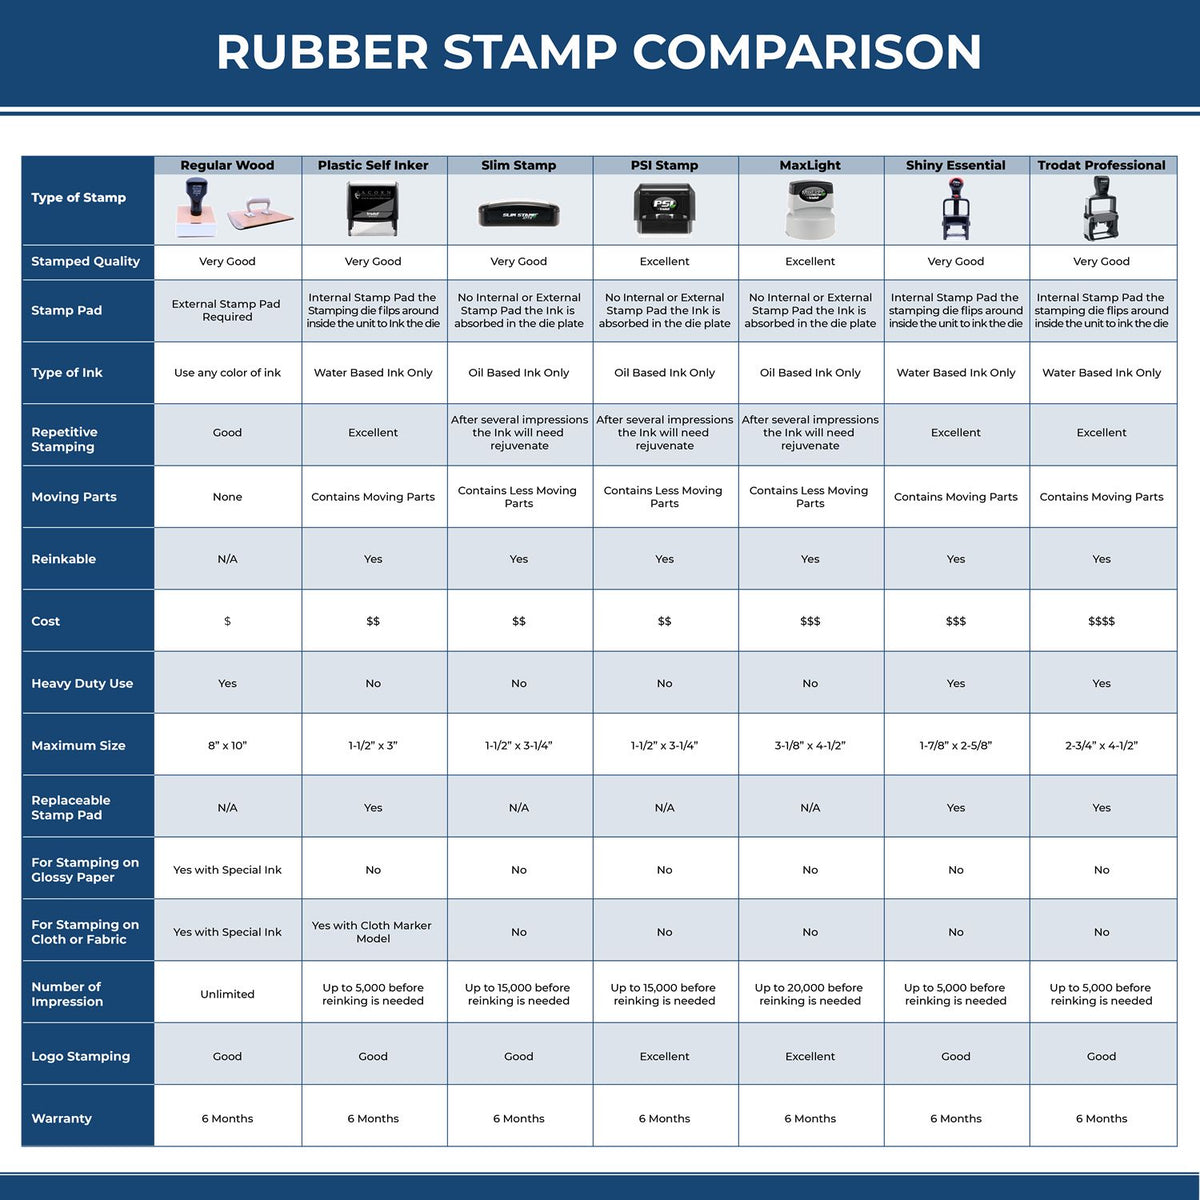 A comparison chart for the different types of mount models available for the Wooden Handle Alaska State Seal Notary Public Stamp.